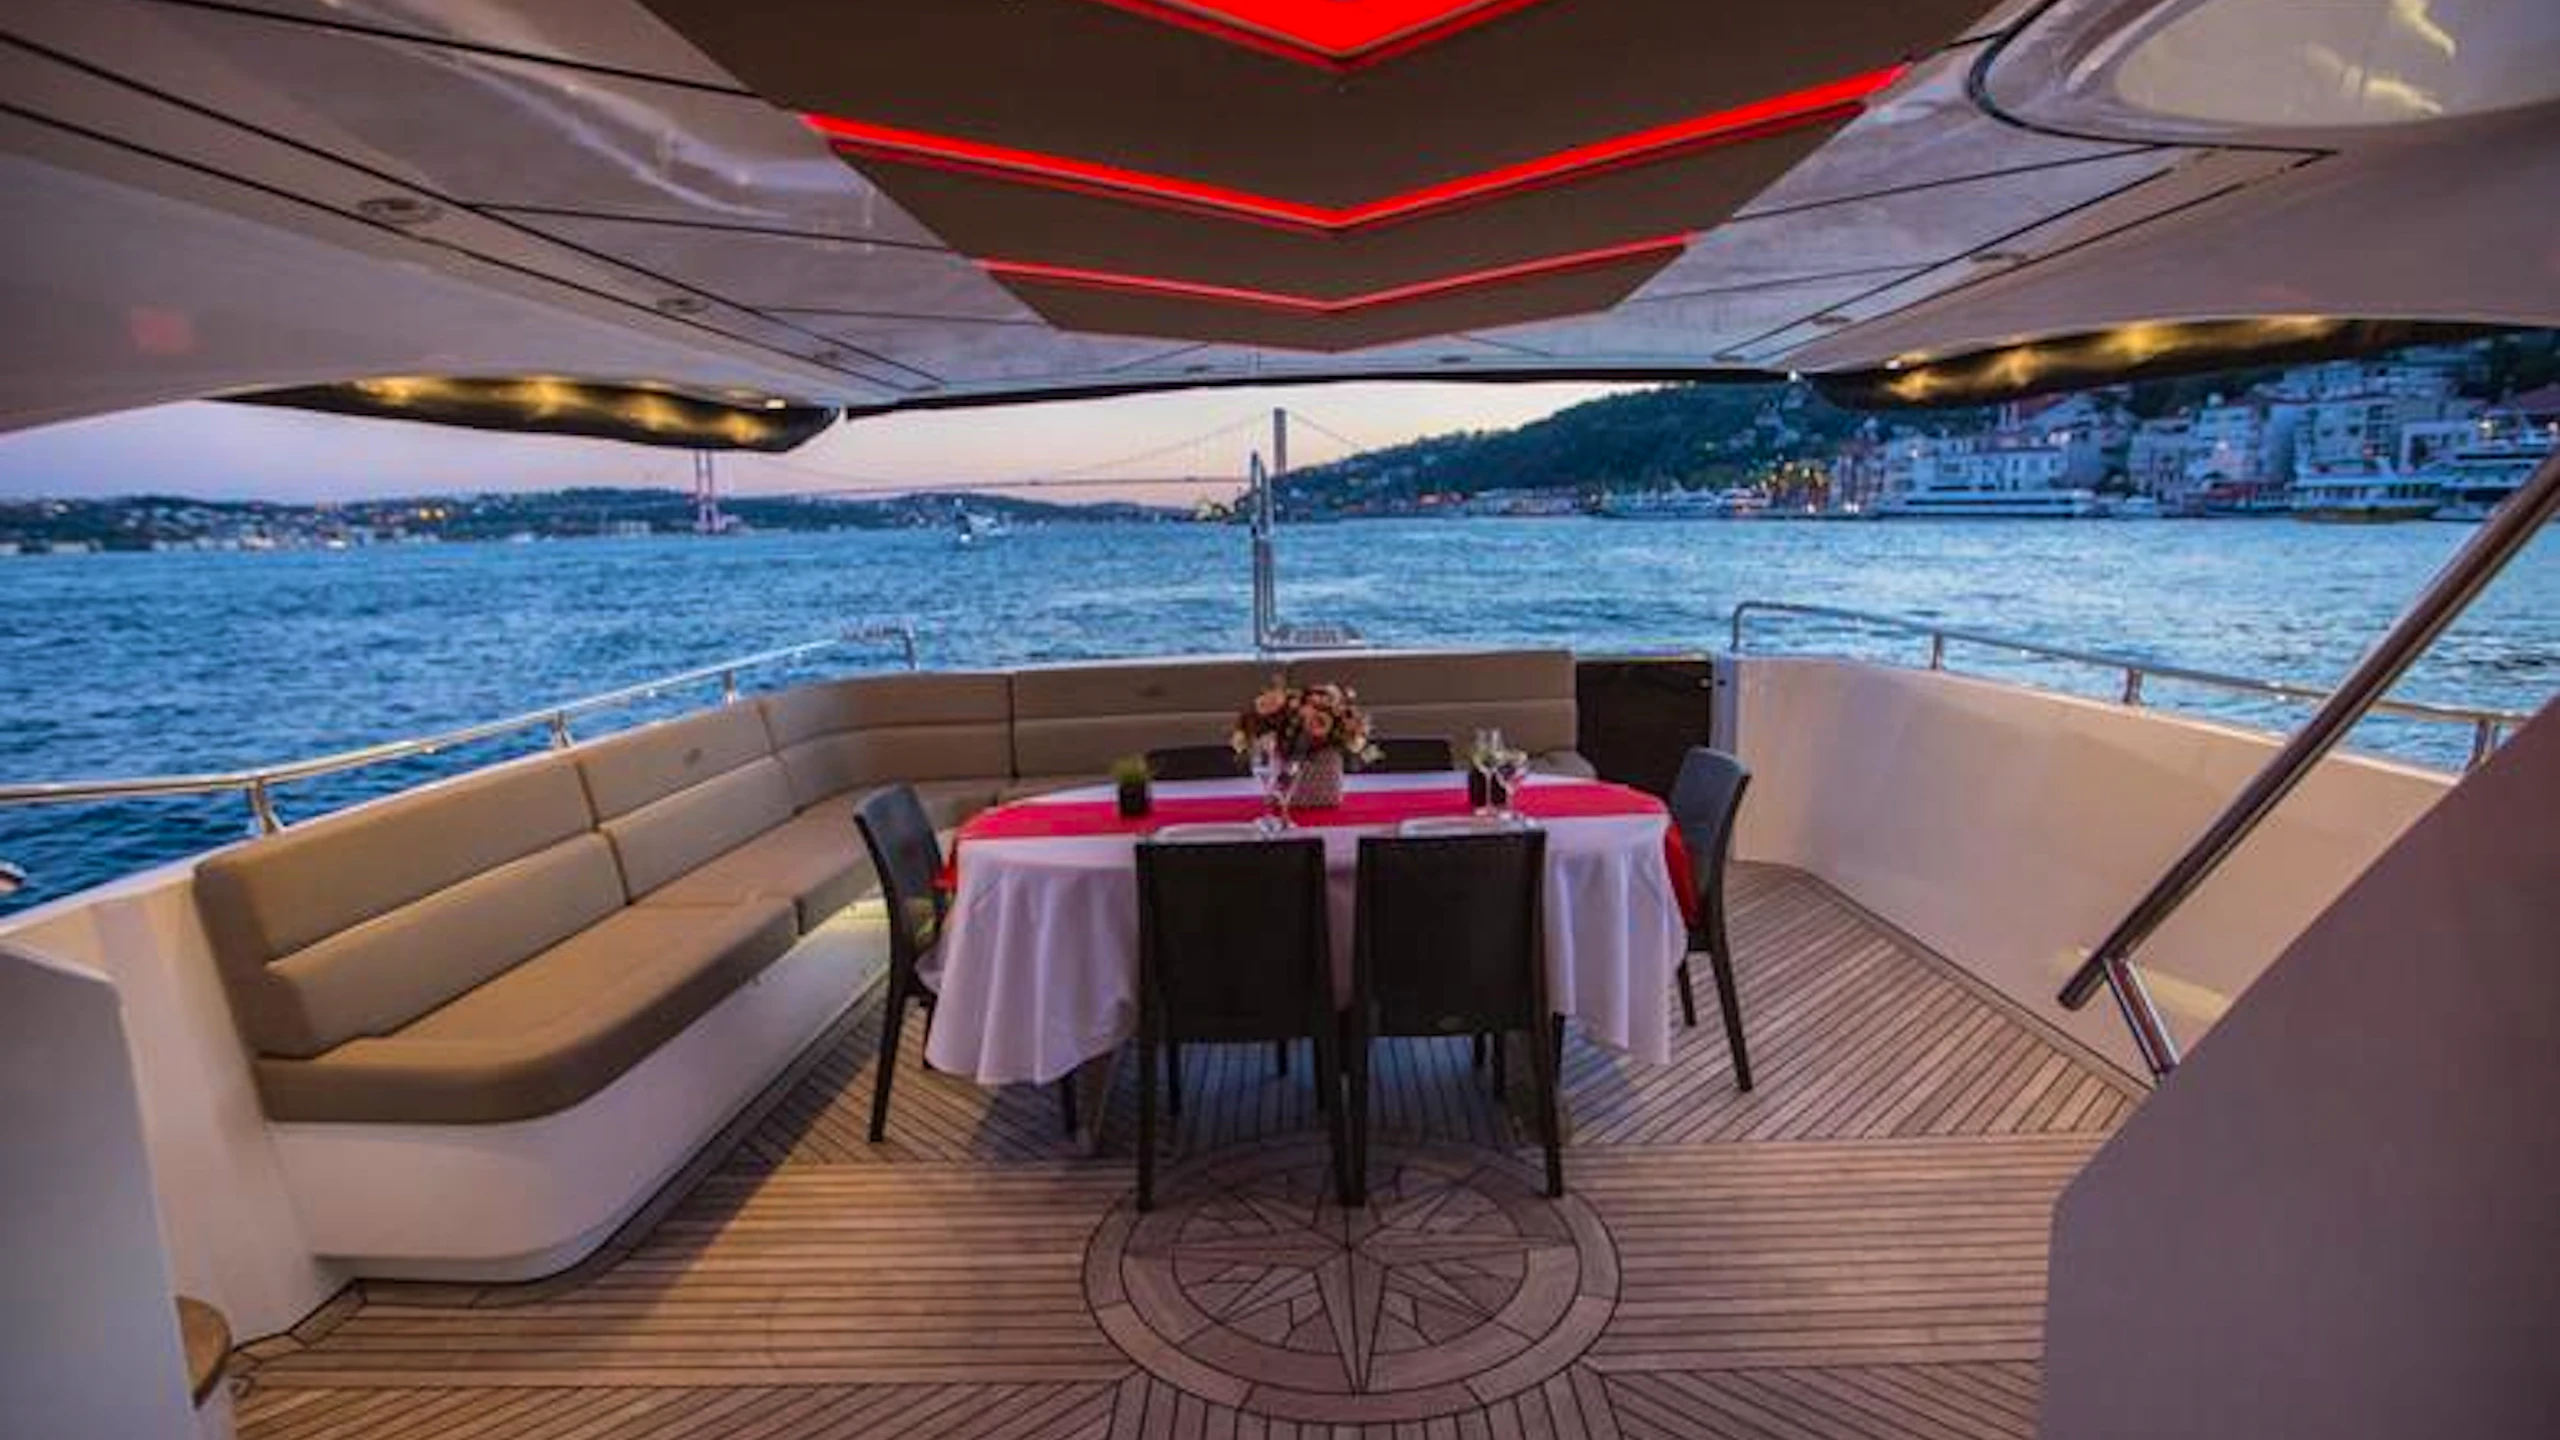 Evening Sunset Cruise in Istanbul with Luxury Yacht Category